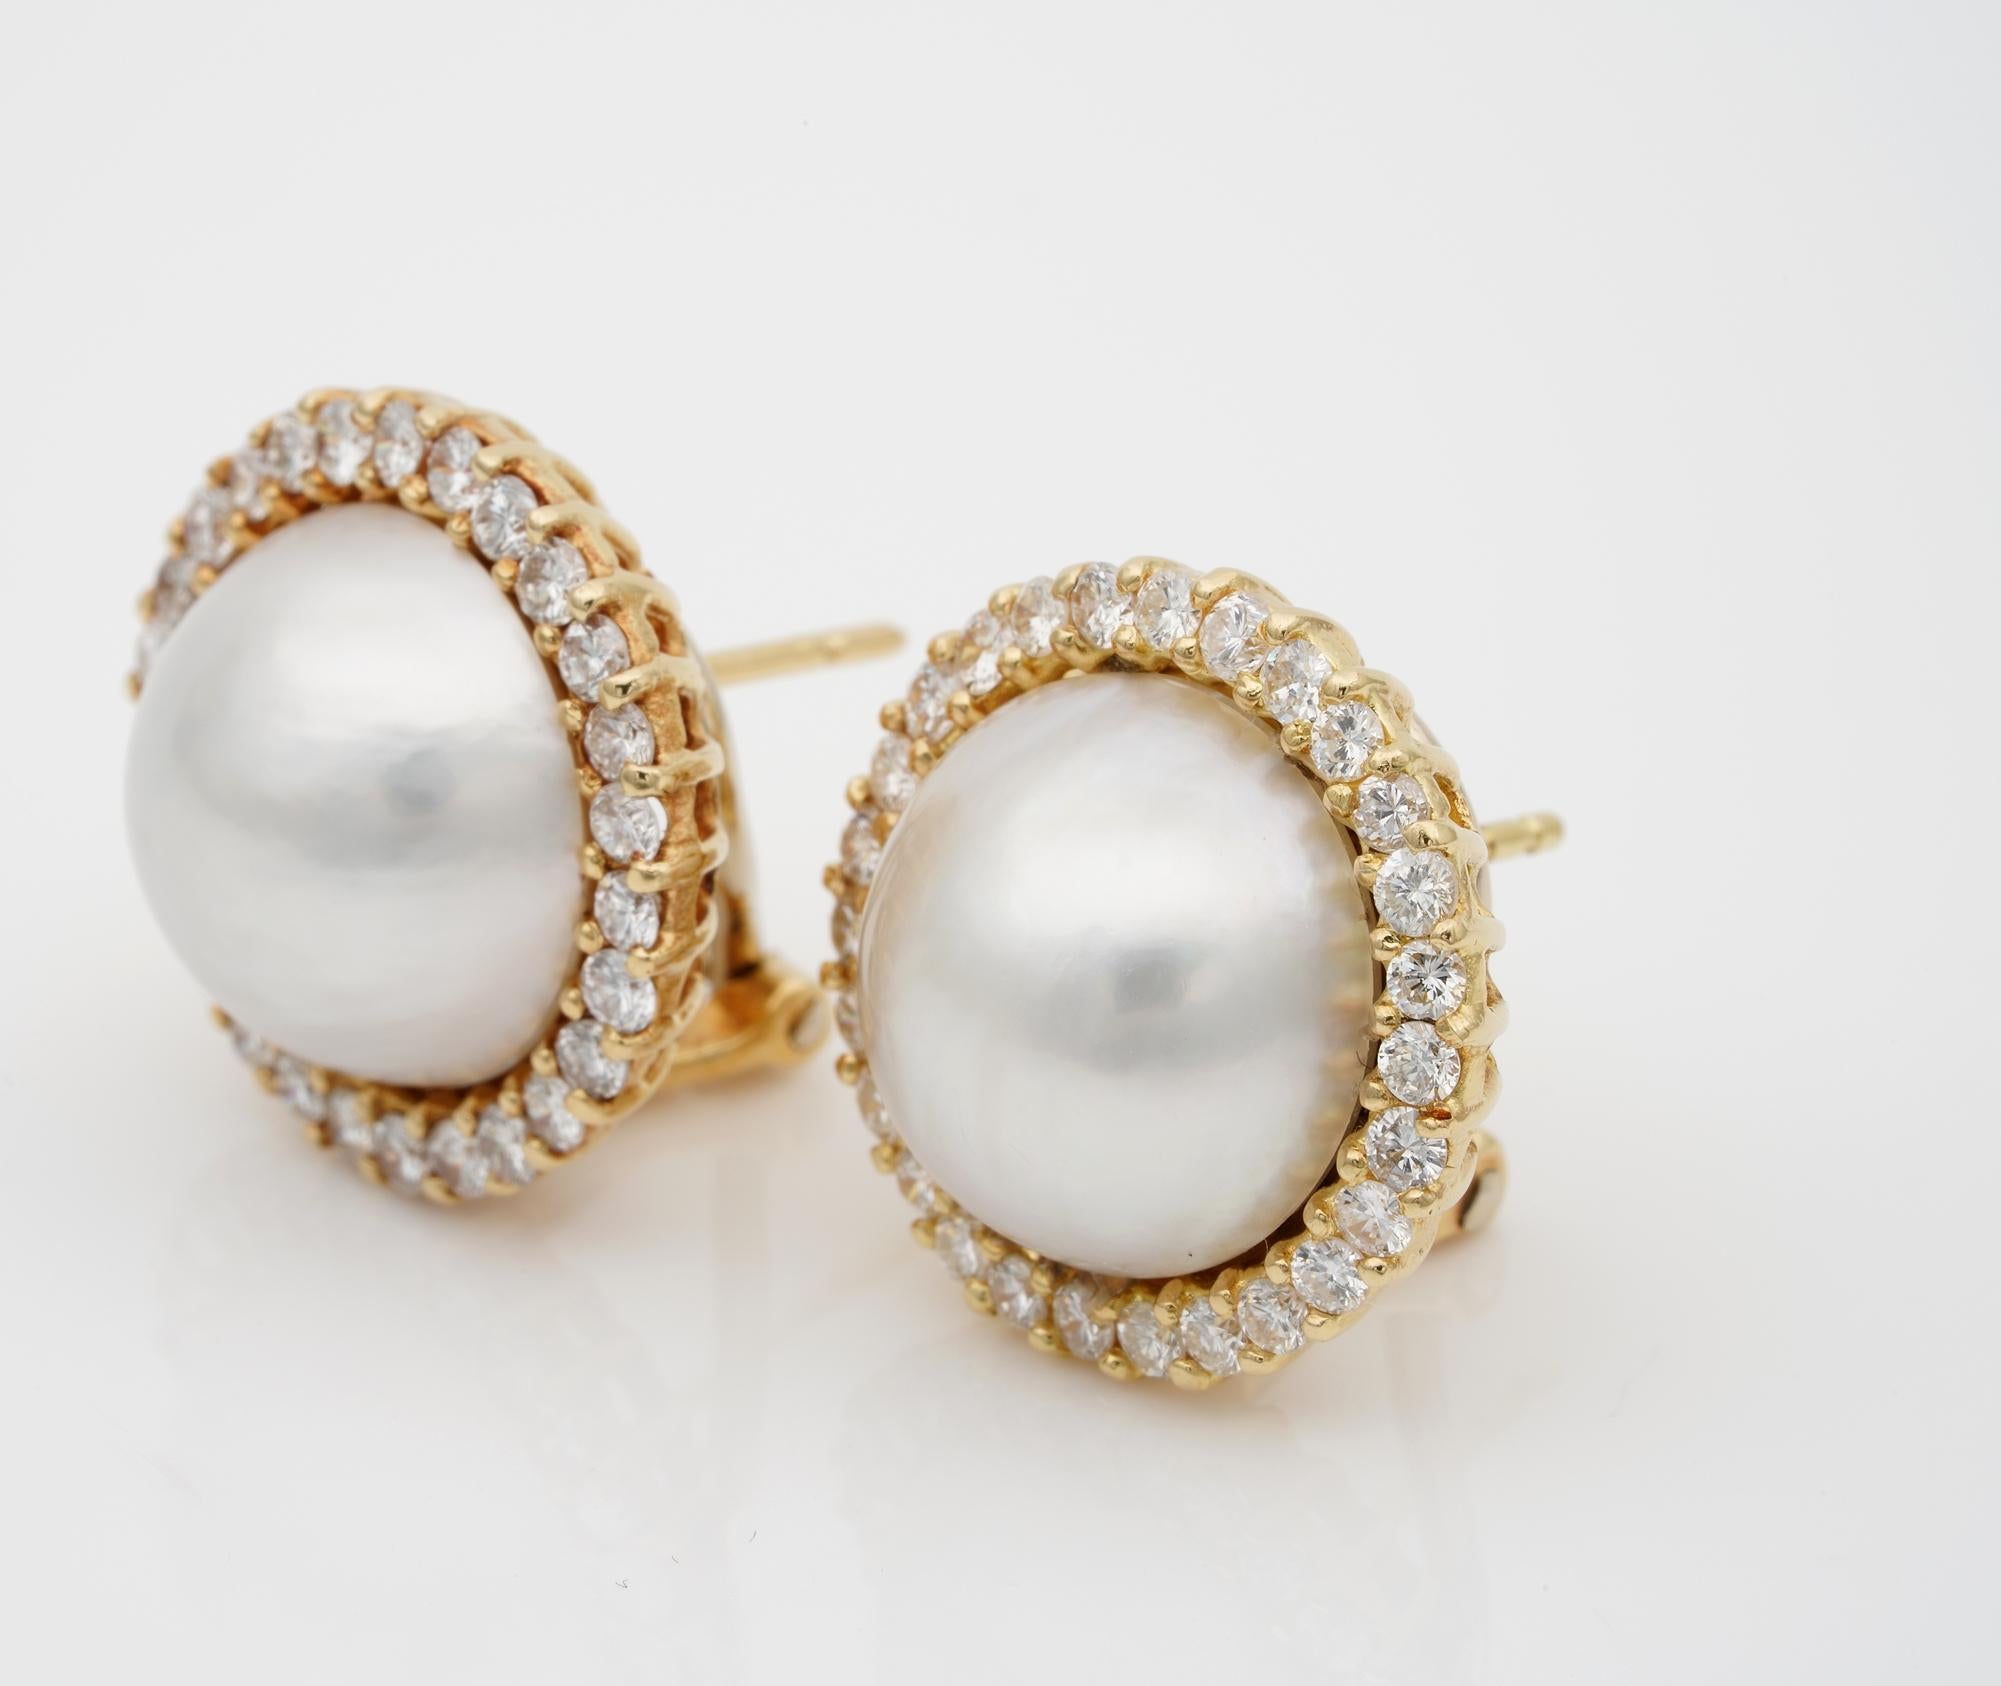 Quality English Mabe Pearl 1.50 Carat G VVS Brilliant Cut Diamond Earrings In Good Condition For Sale In Napoli, IT